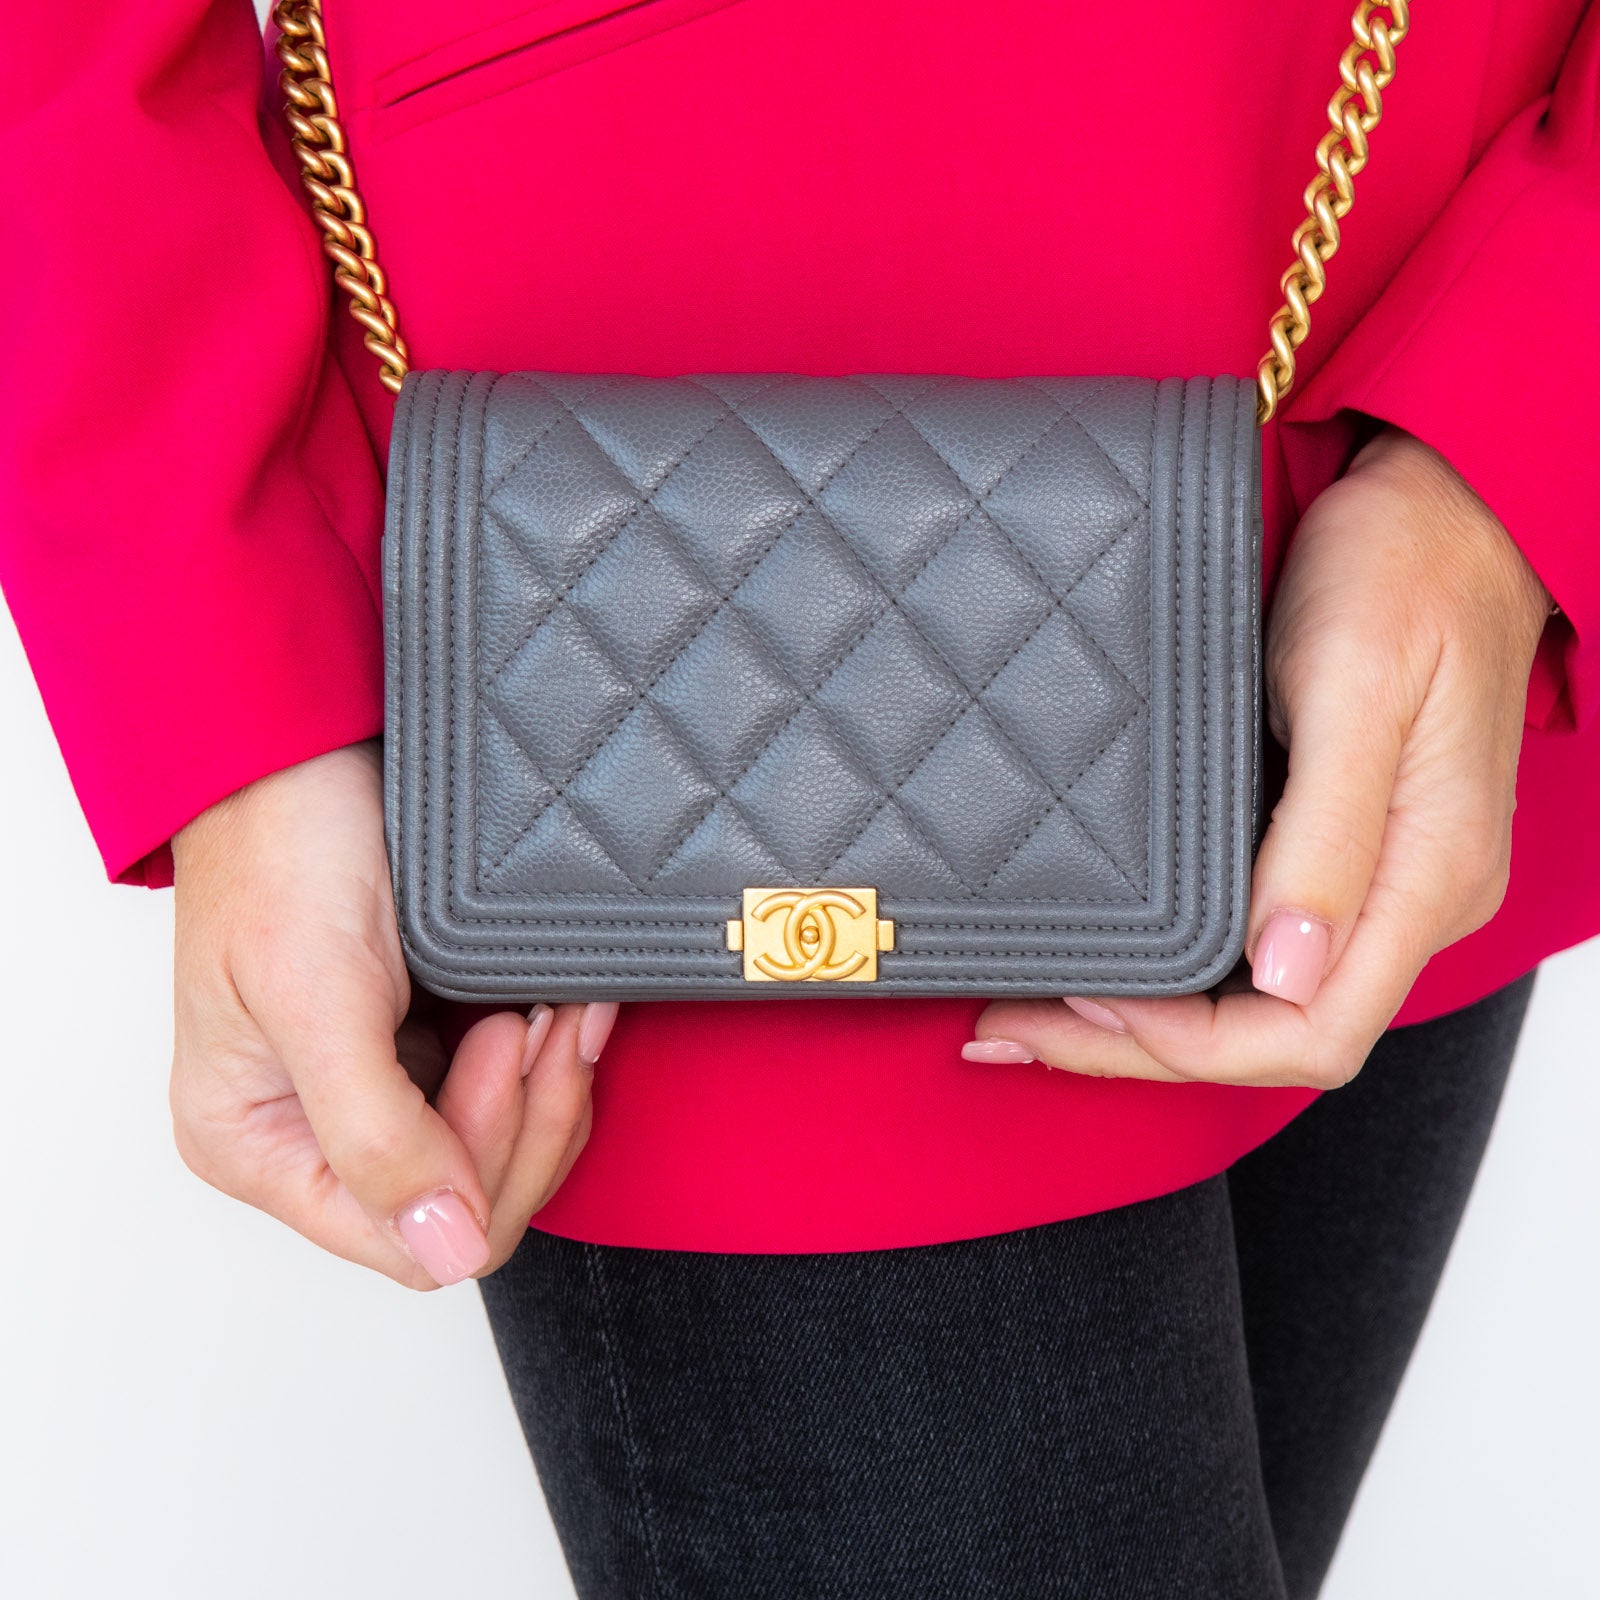 Chanel Mini Quilted Wallet On Chain WOC Caviar Iridescent Pink Gold Ha –  Coco Approved Studio